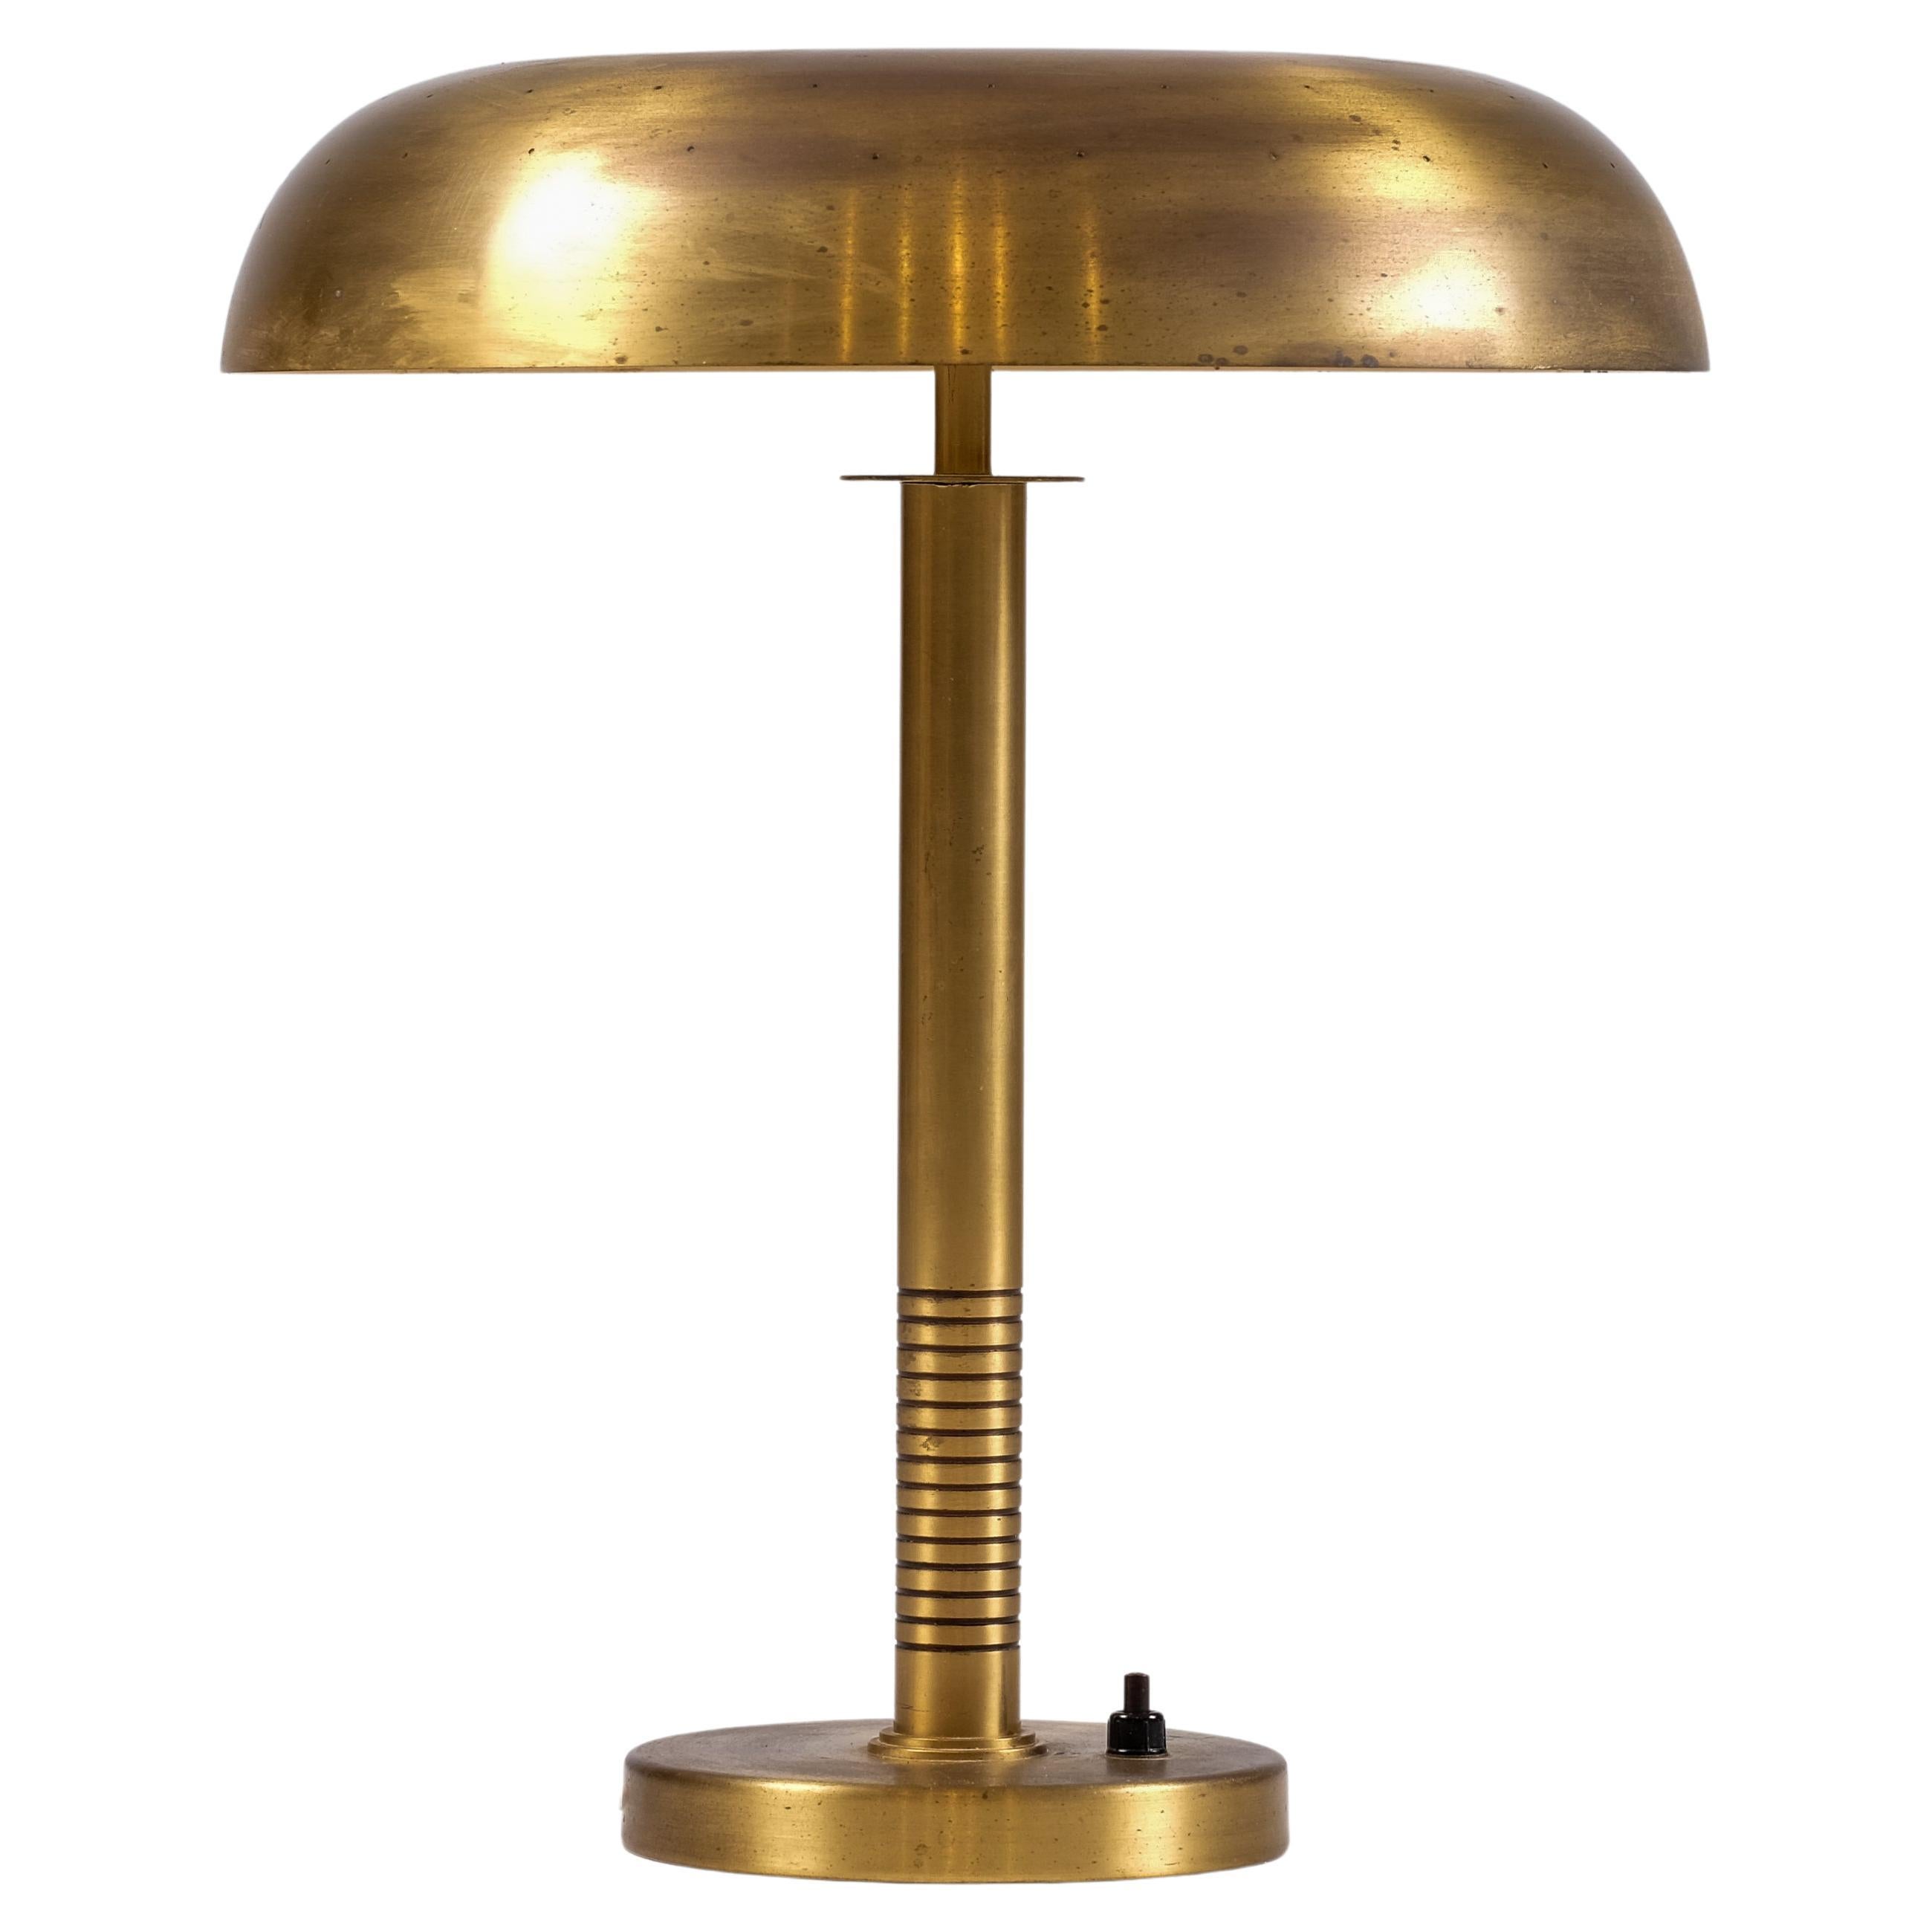 Swedish Brass Table Lamp by Boréns, 1950s